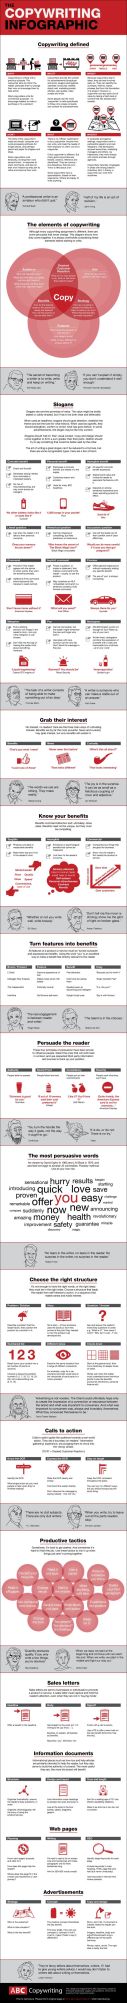 Infographic about copywriting with many excellent messages and quotes, like: 'A professional writer is an amateur who did not quit.' (Richard Bach).